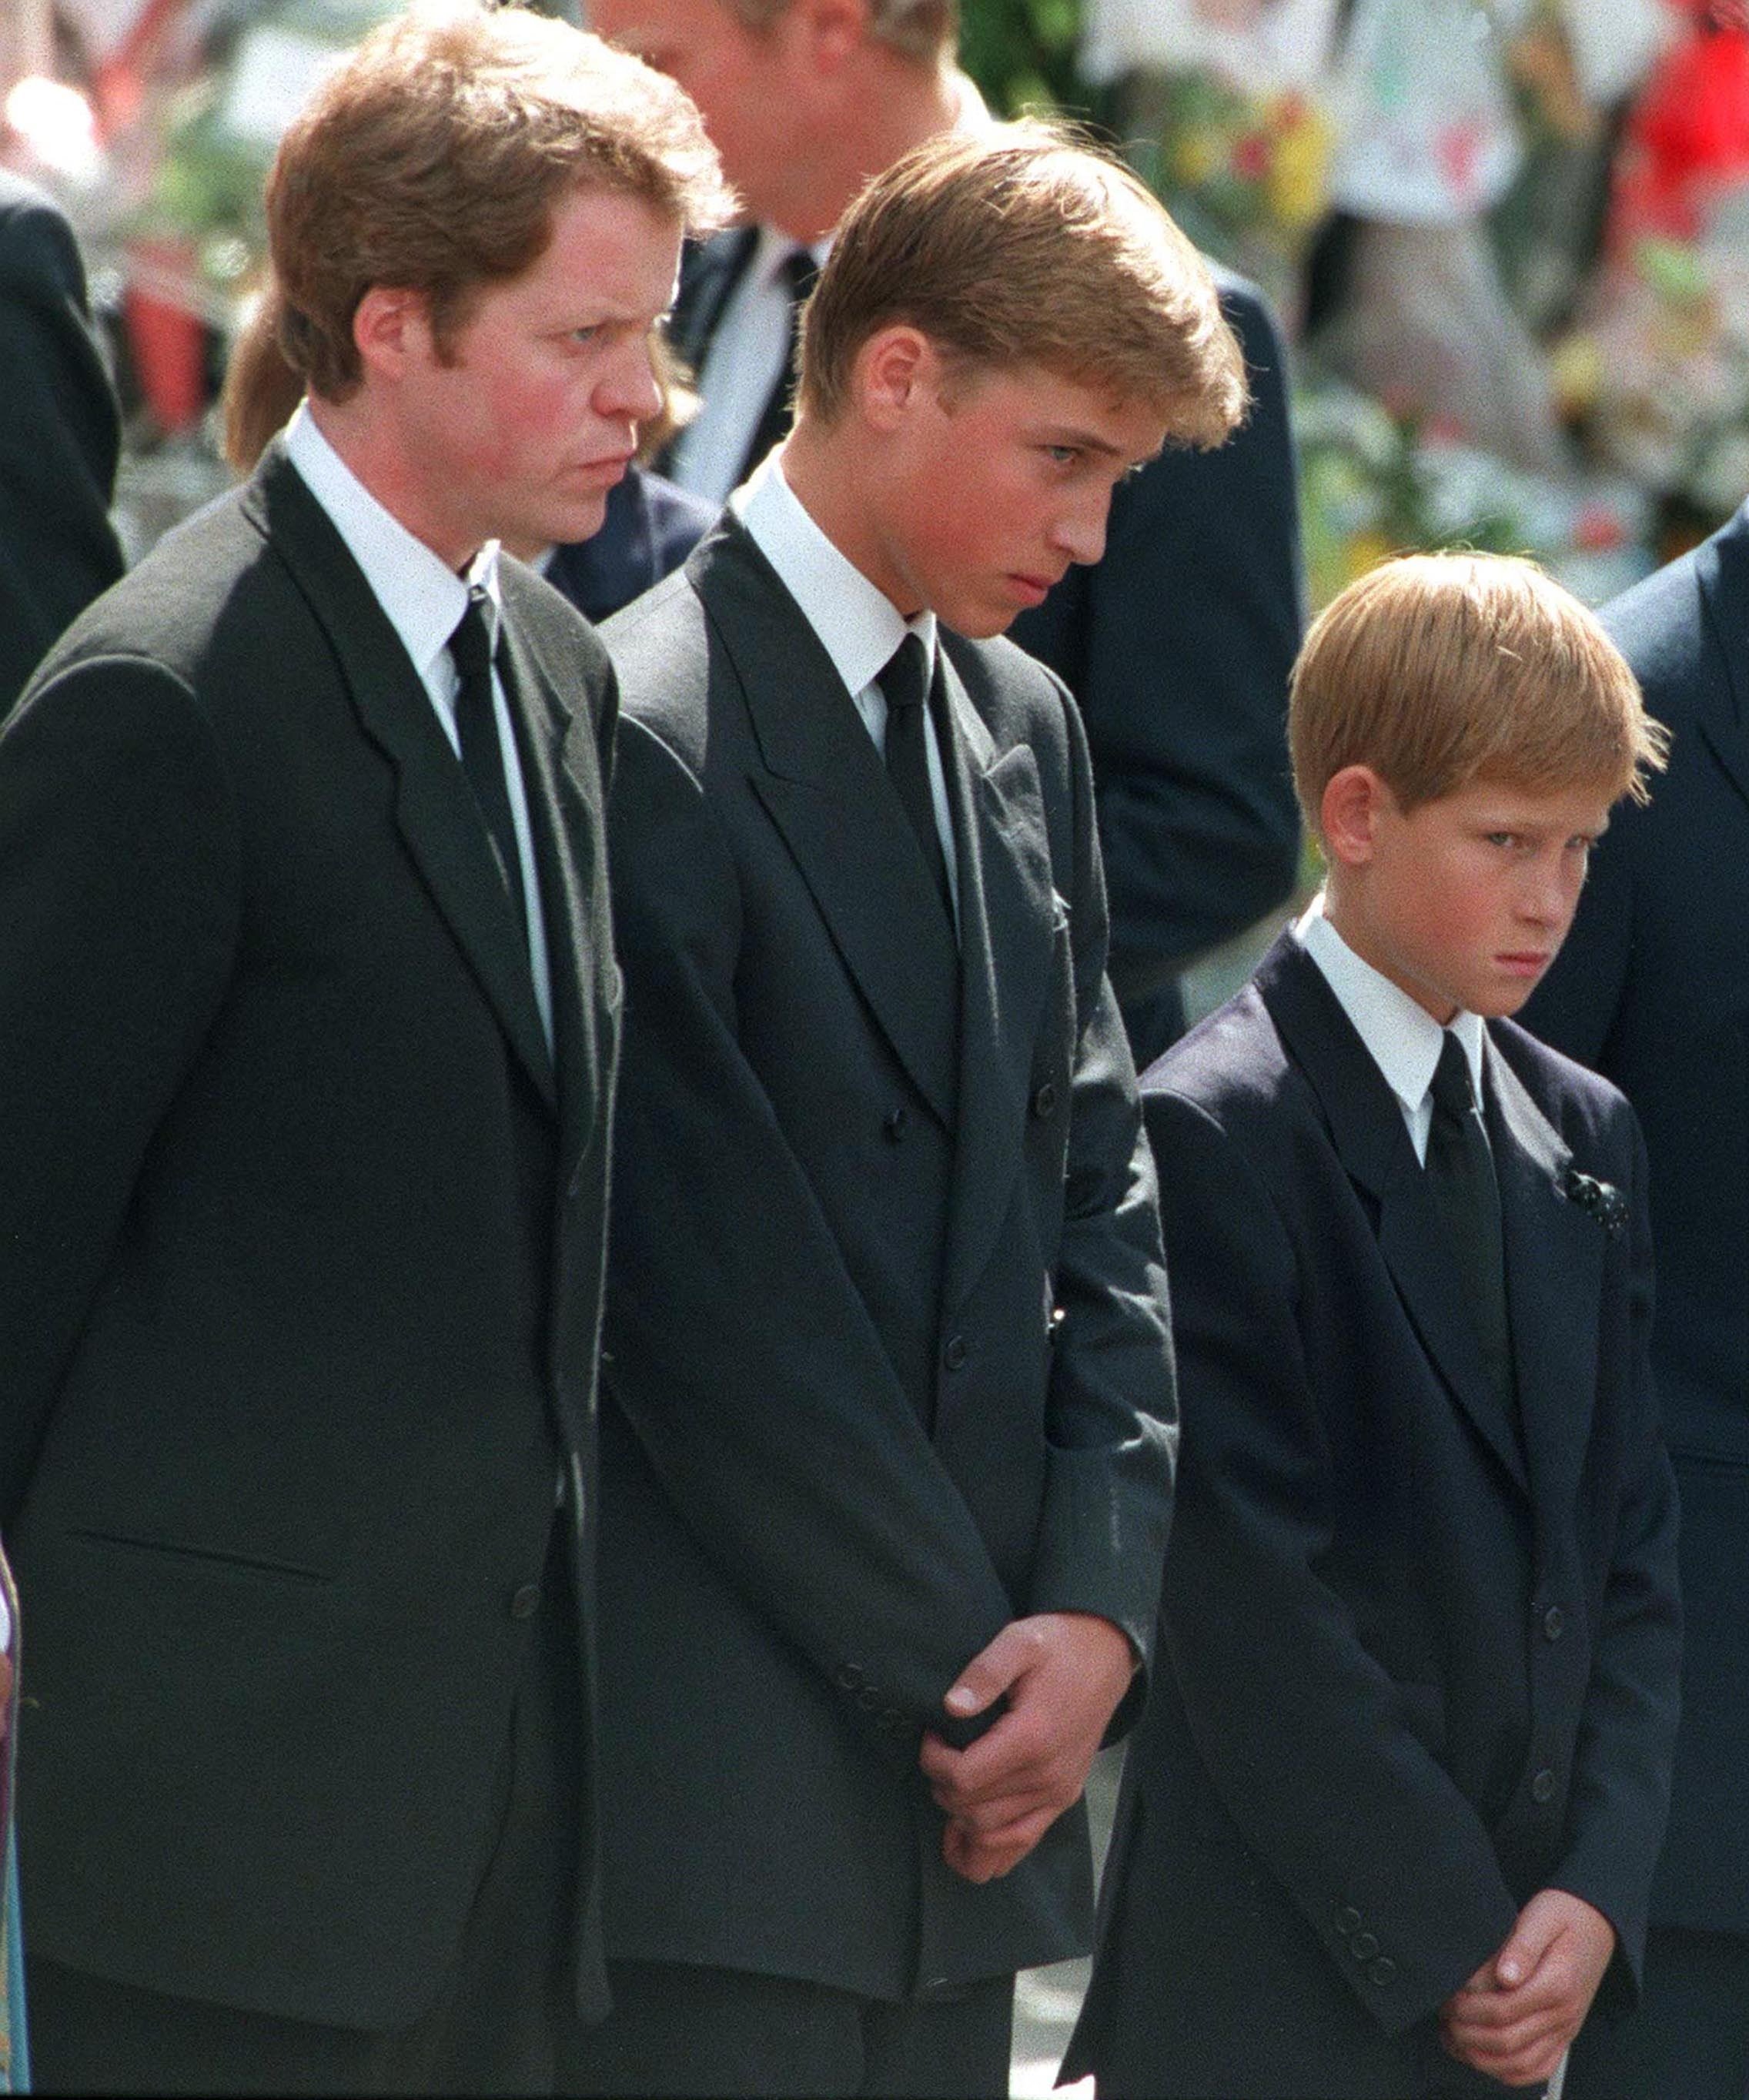 Princes William and Harry with their uncle, Charles Spencer, outside Westminster Abbey on the day of their mother's funeral on 6 September 1997. | Photo: Getty Images